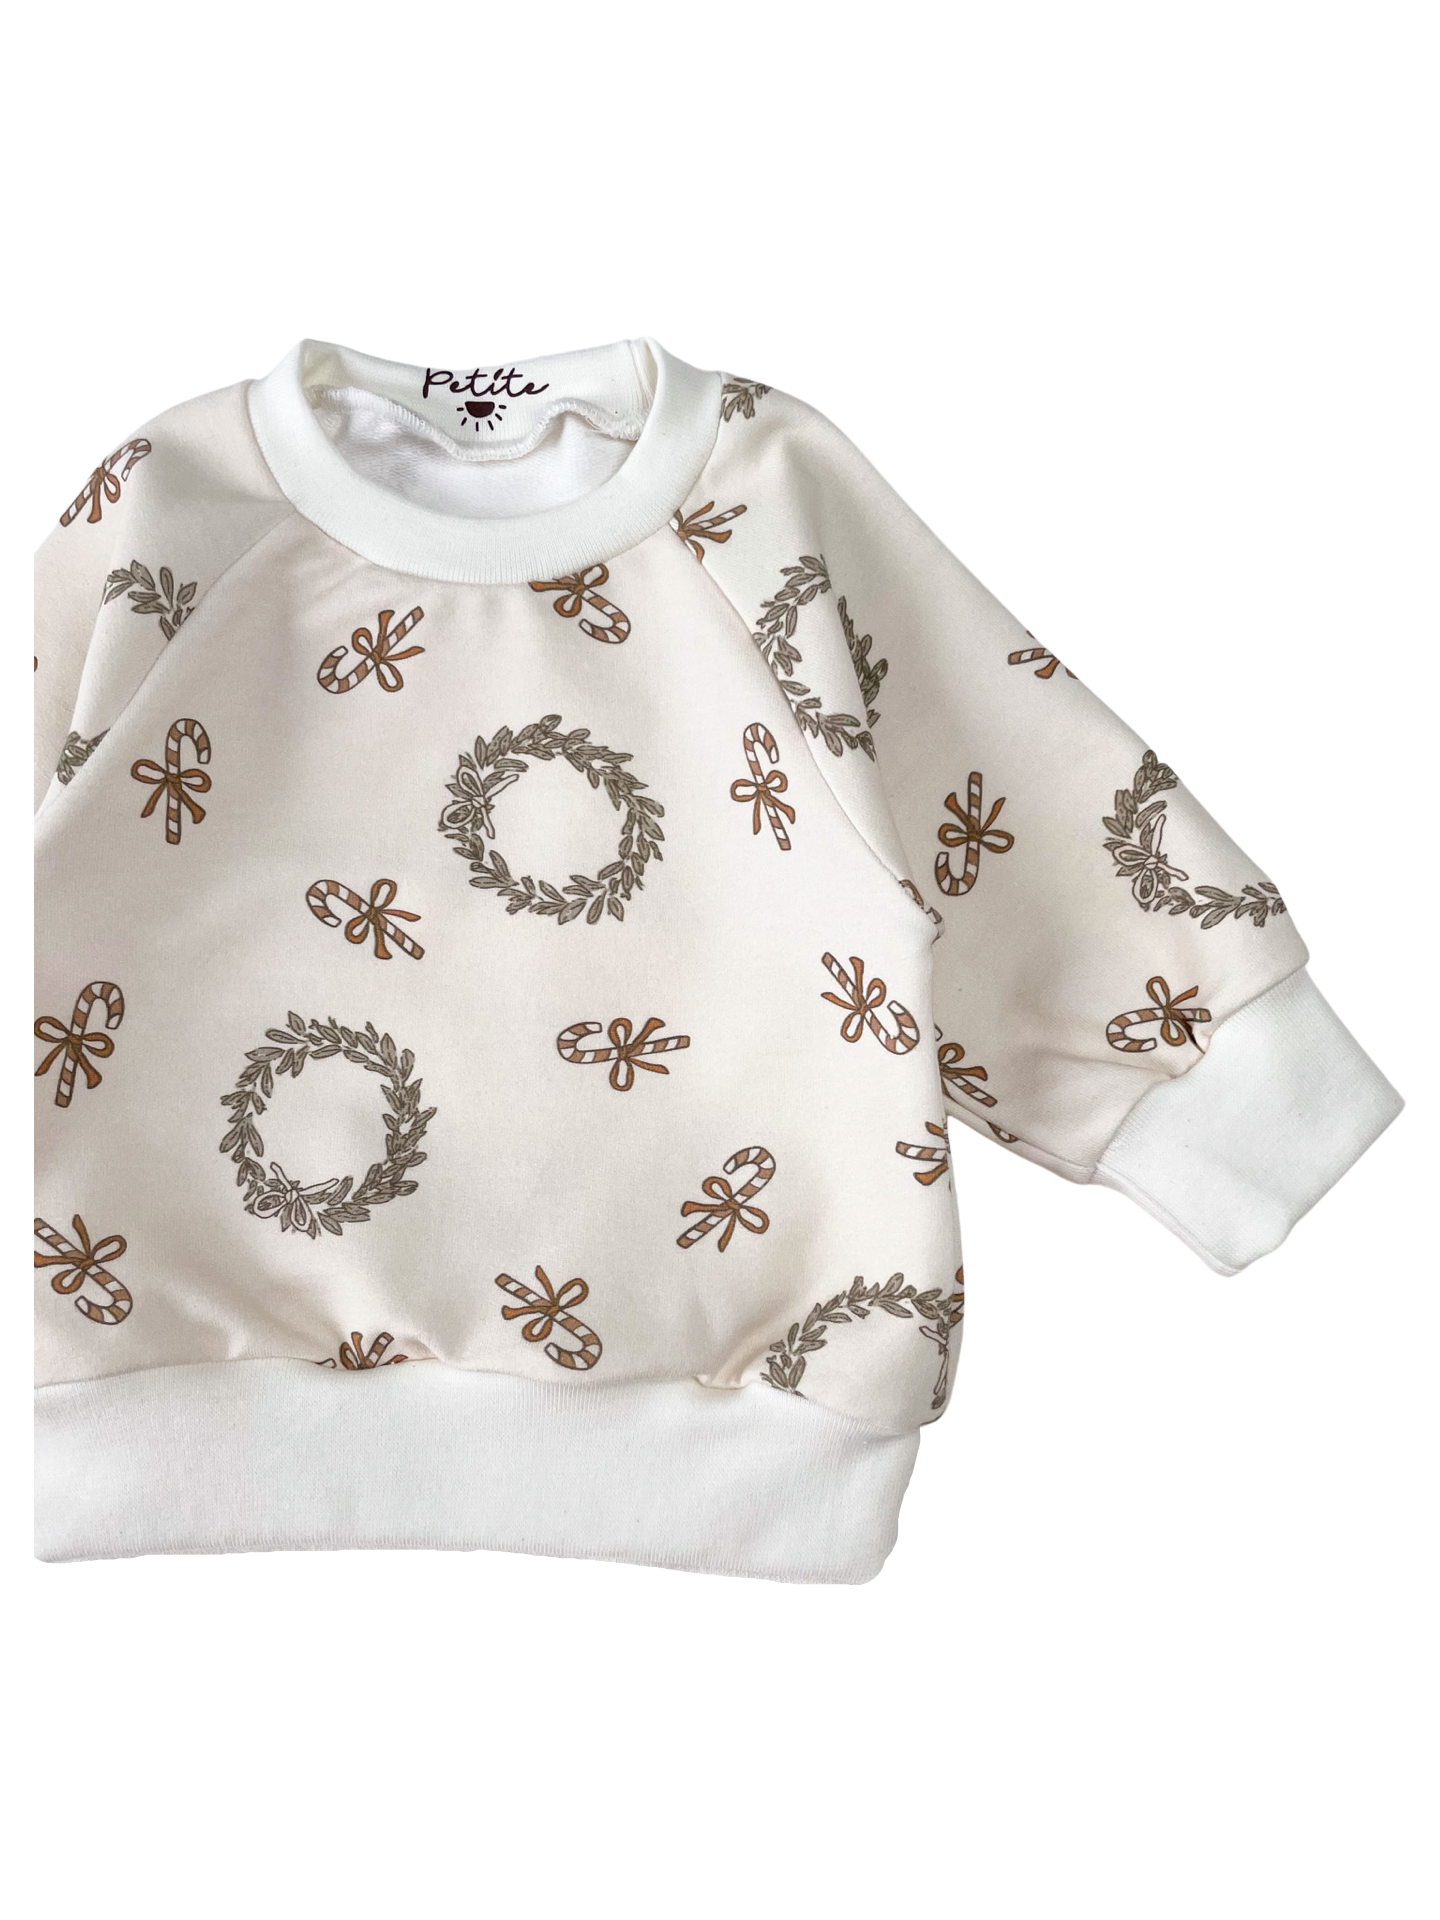 Baby cotton sweatshirt / Candy canes